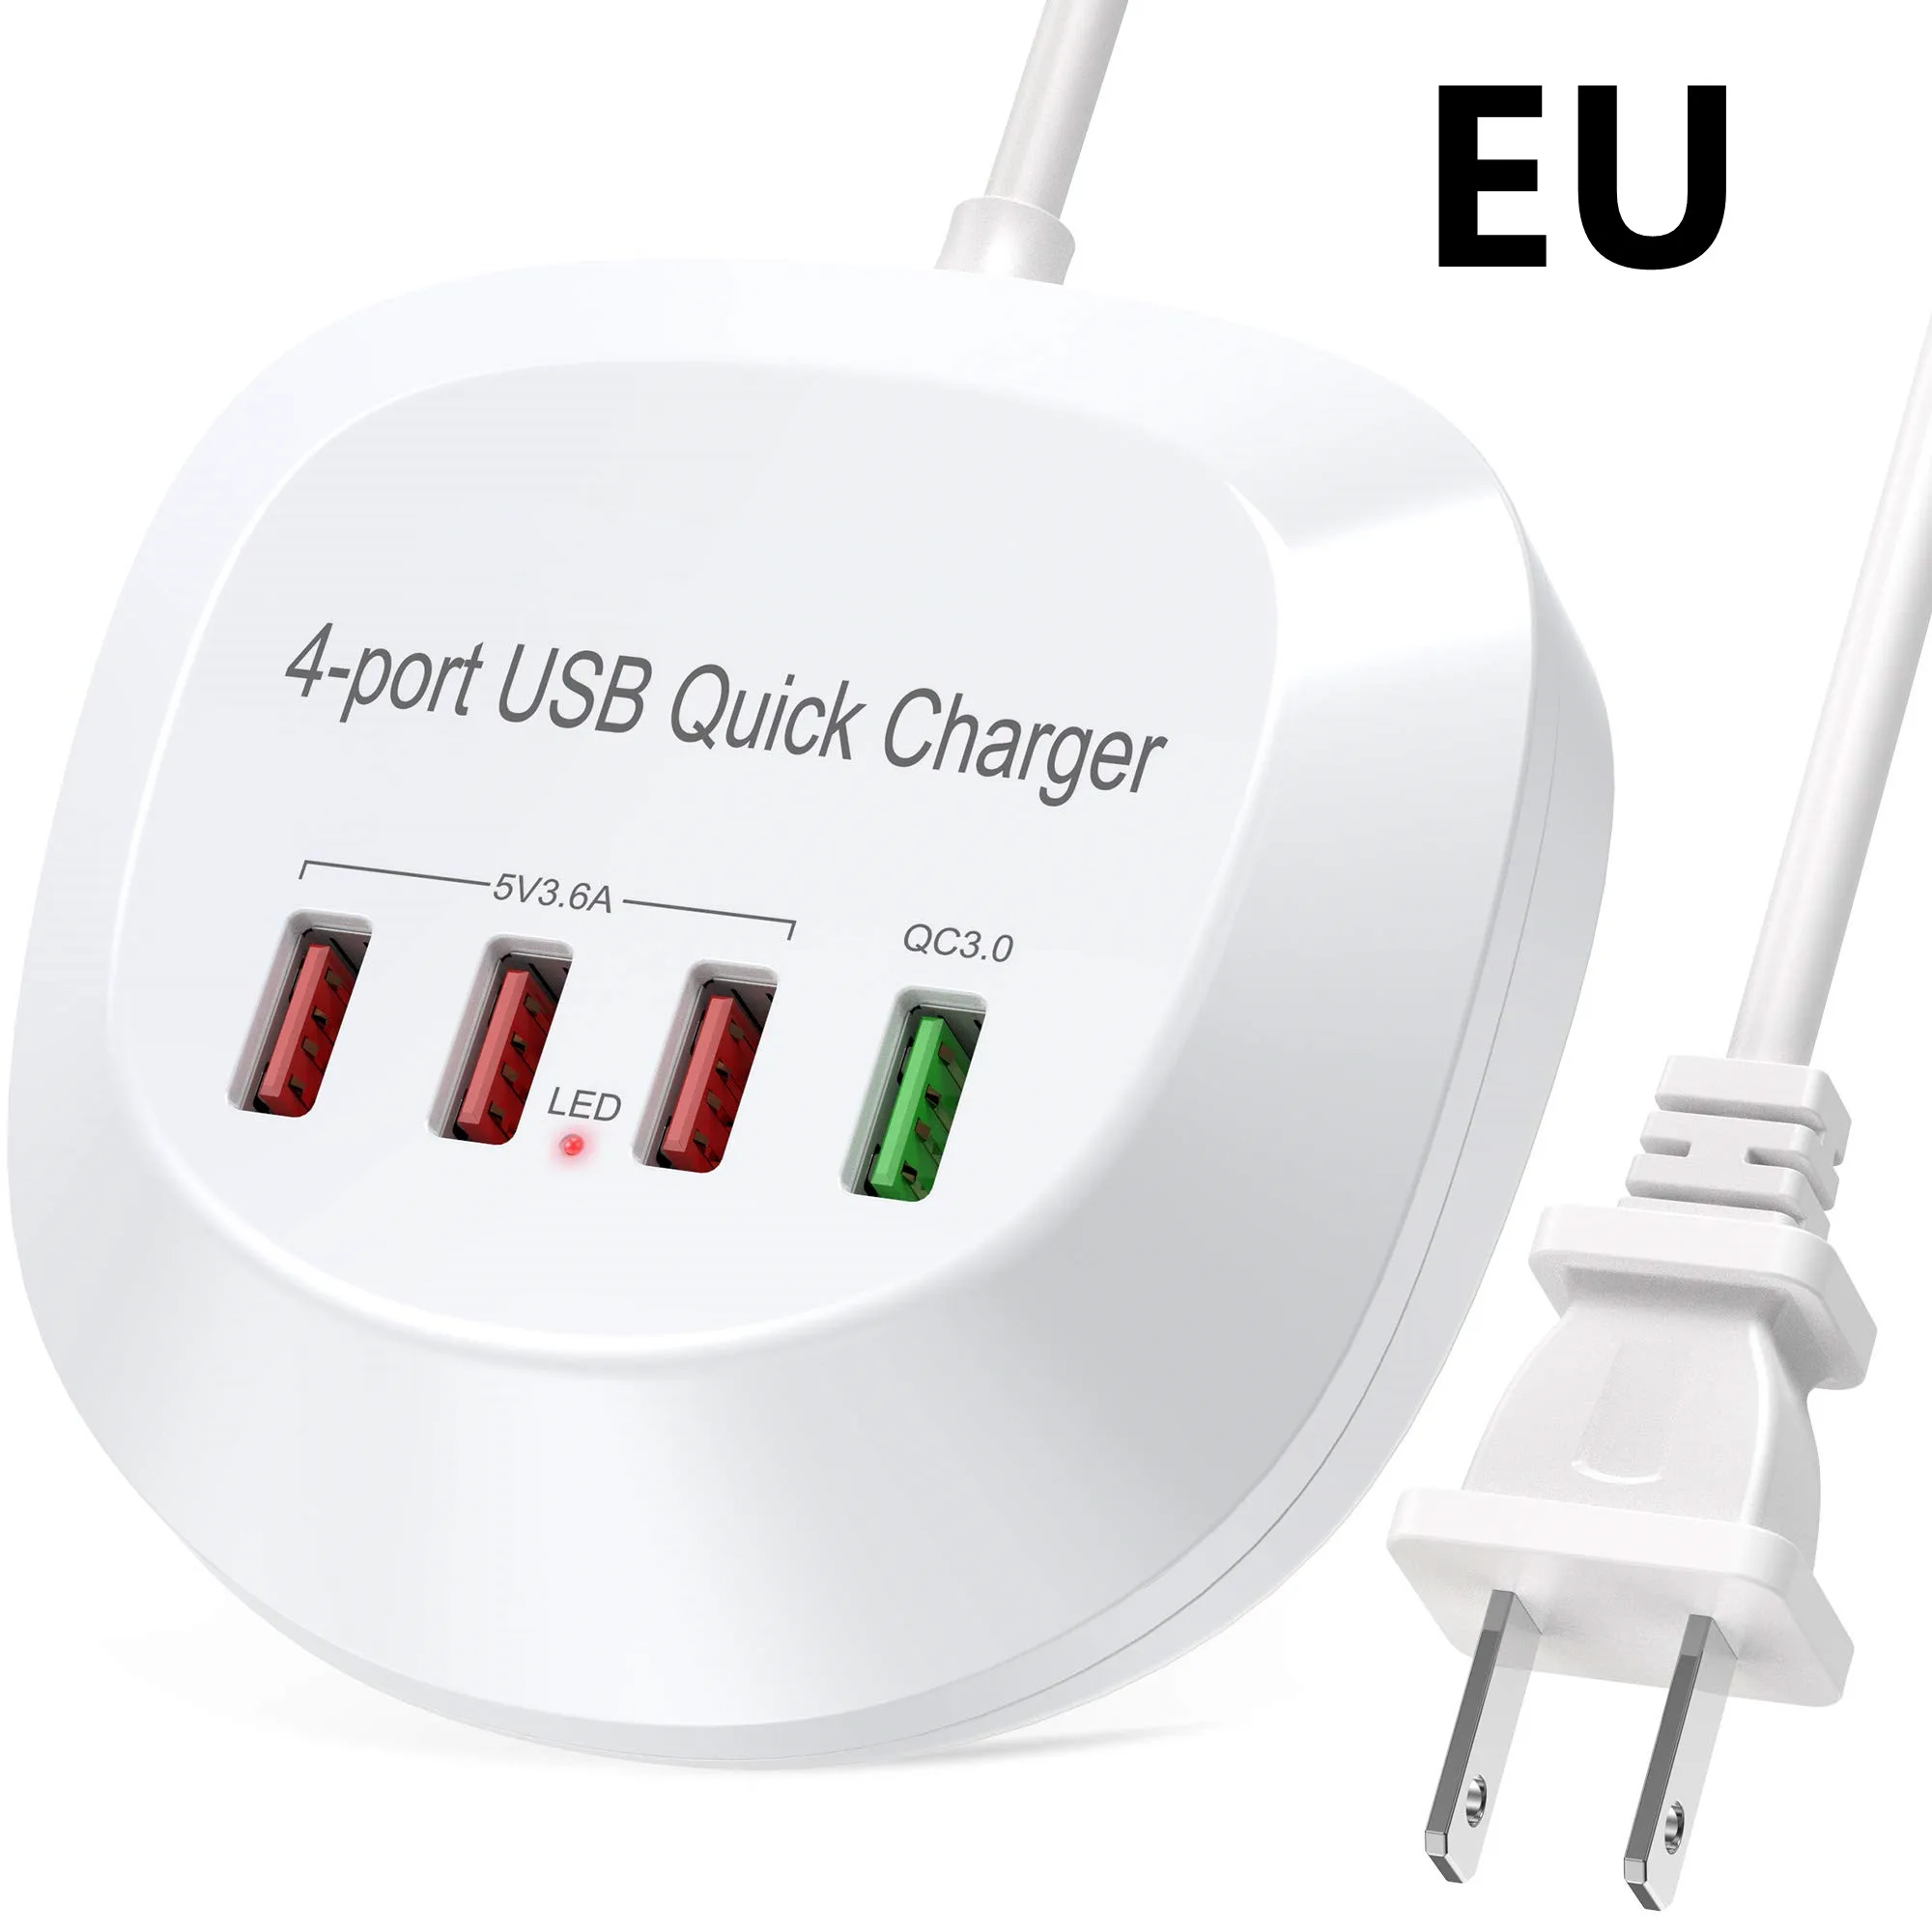 

4-Port USB Quick Charger 5V/ 3.4A 9V/2A 12V/1.5A Quick Charge QC3.0 Charger Station Dock Multi USB Fasting Charger For Phone